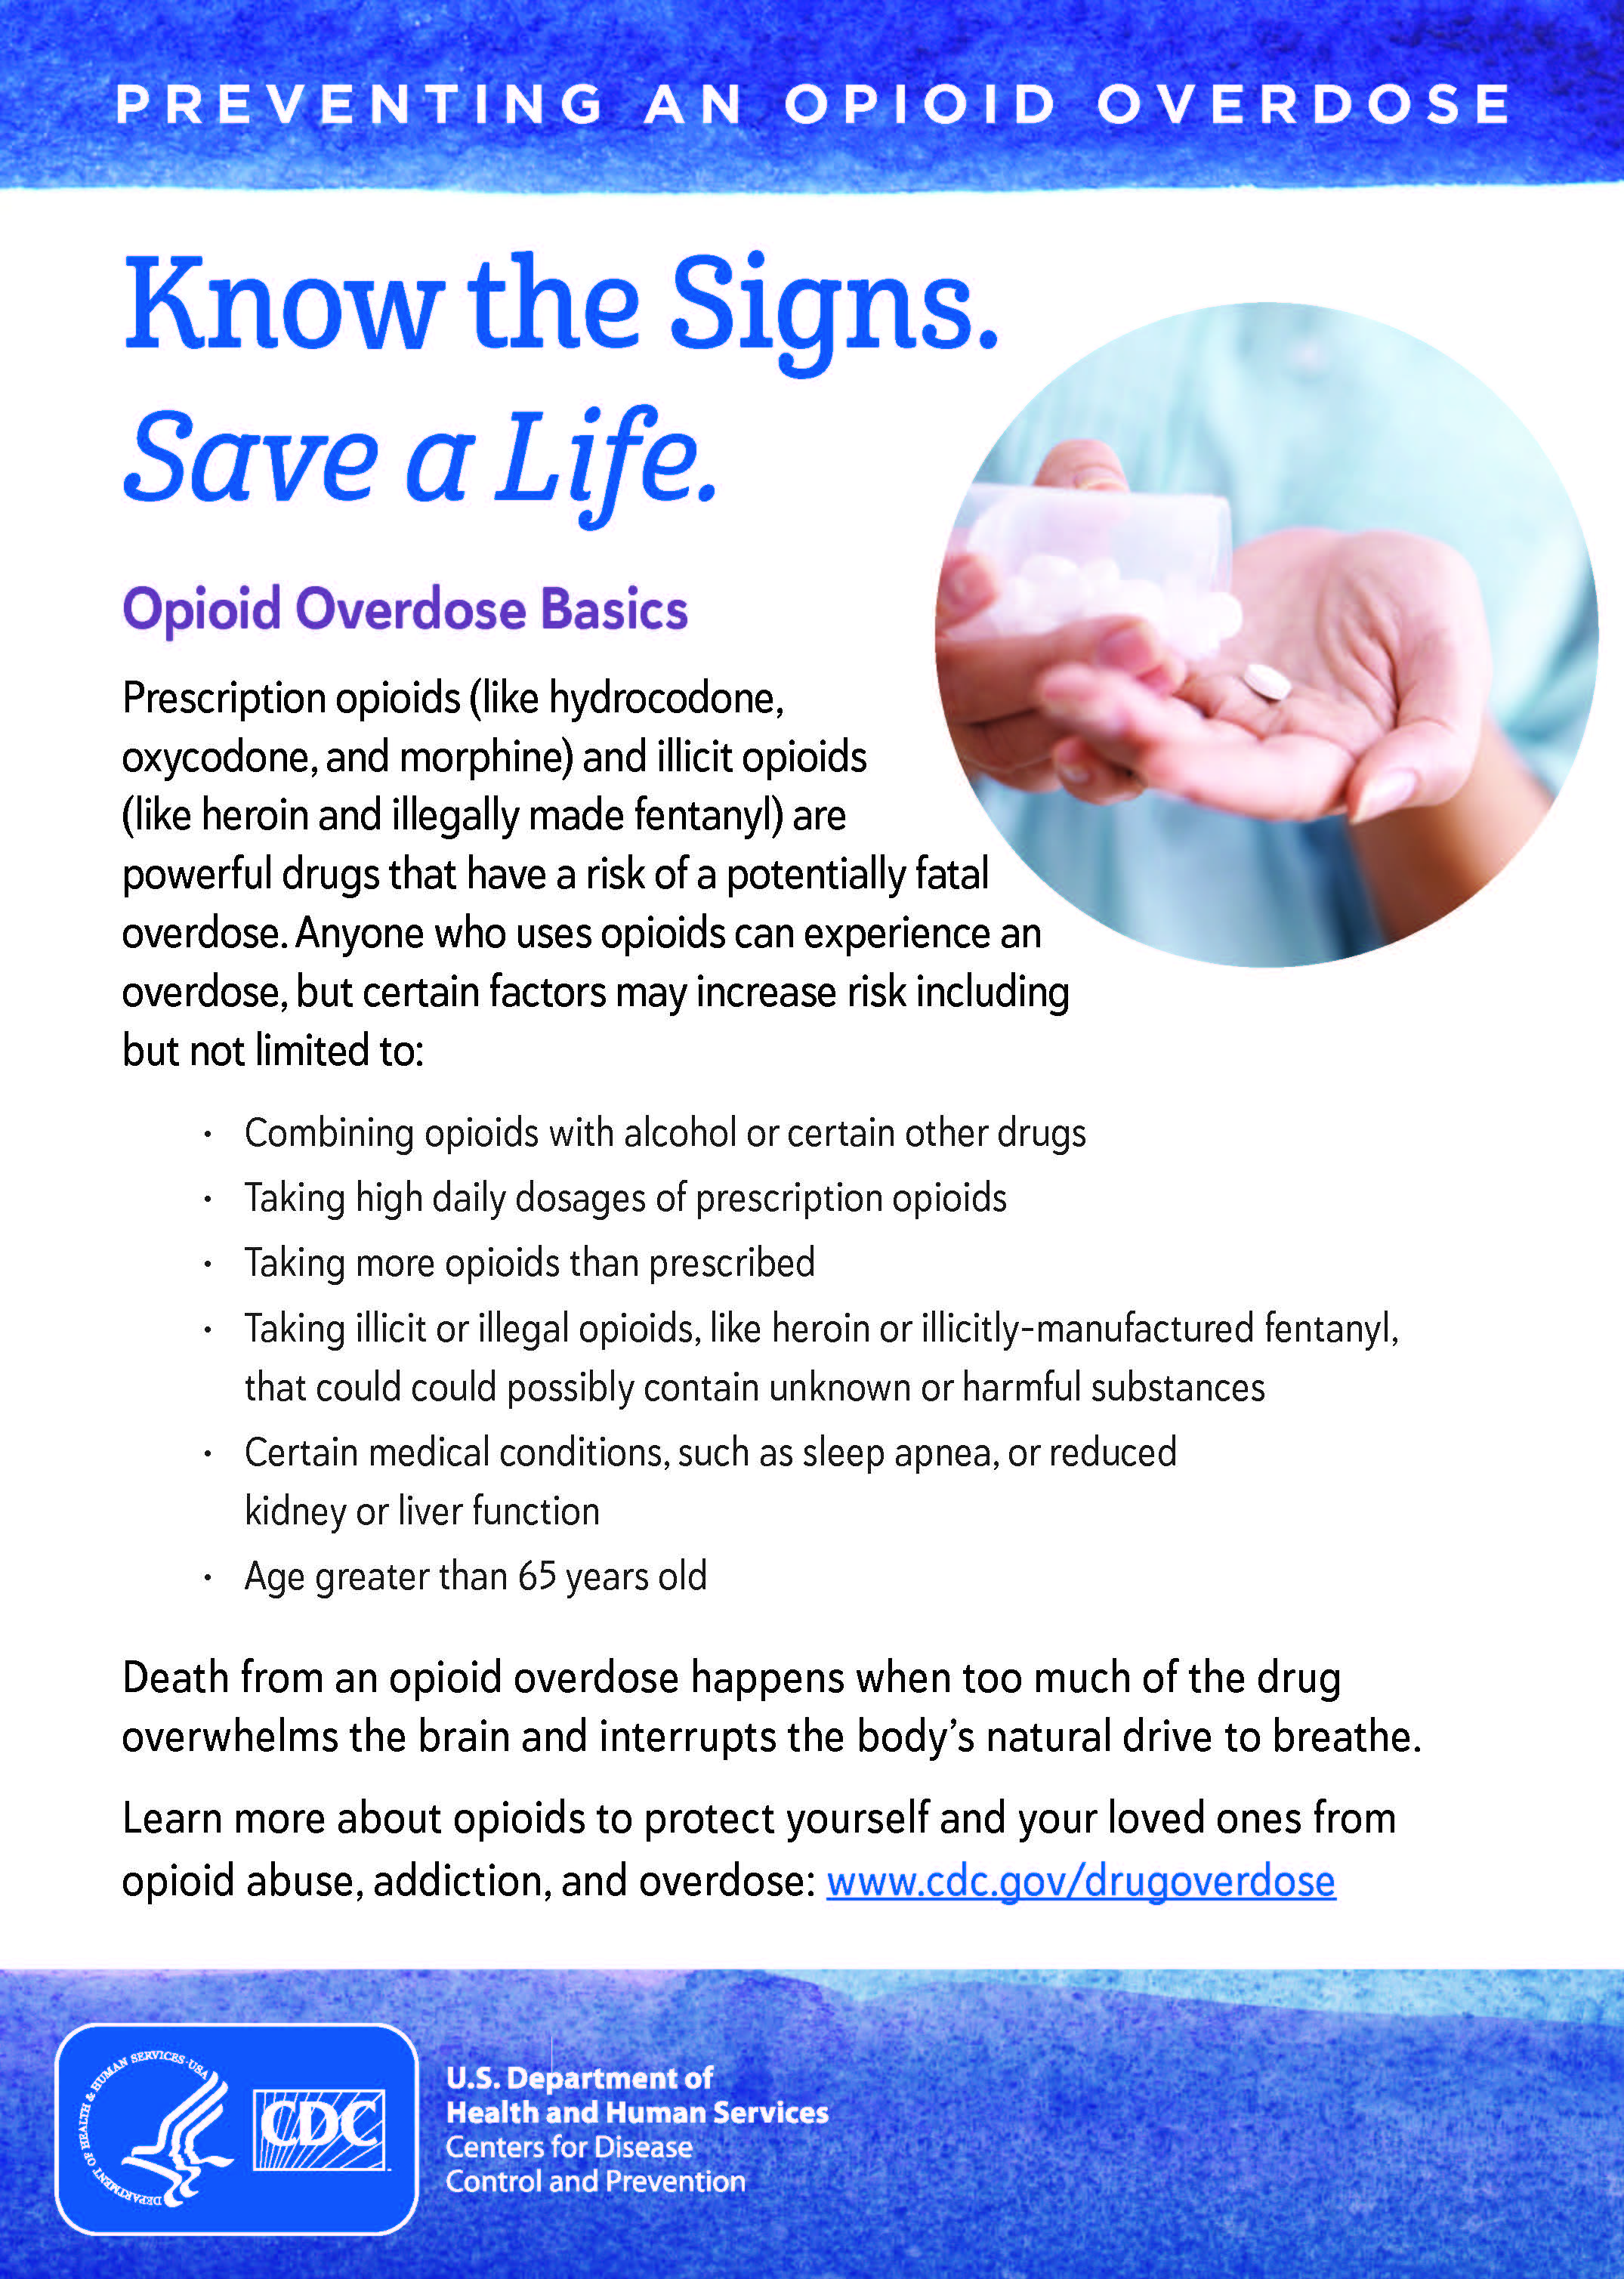 preventing an opioid overdose-for the full text please open the graphic link for the PDF version